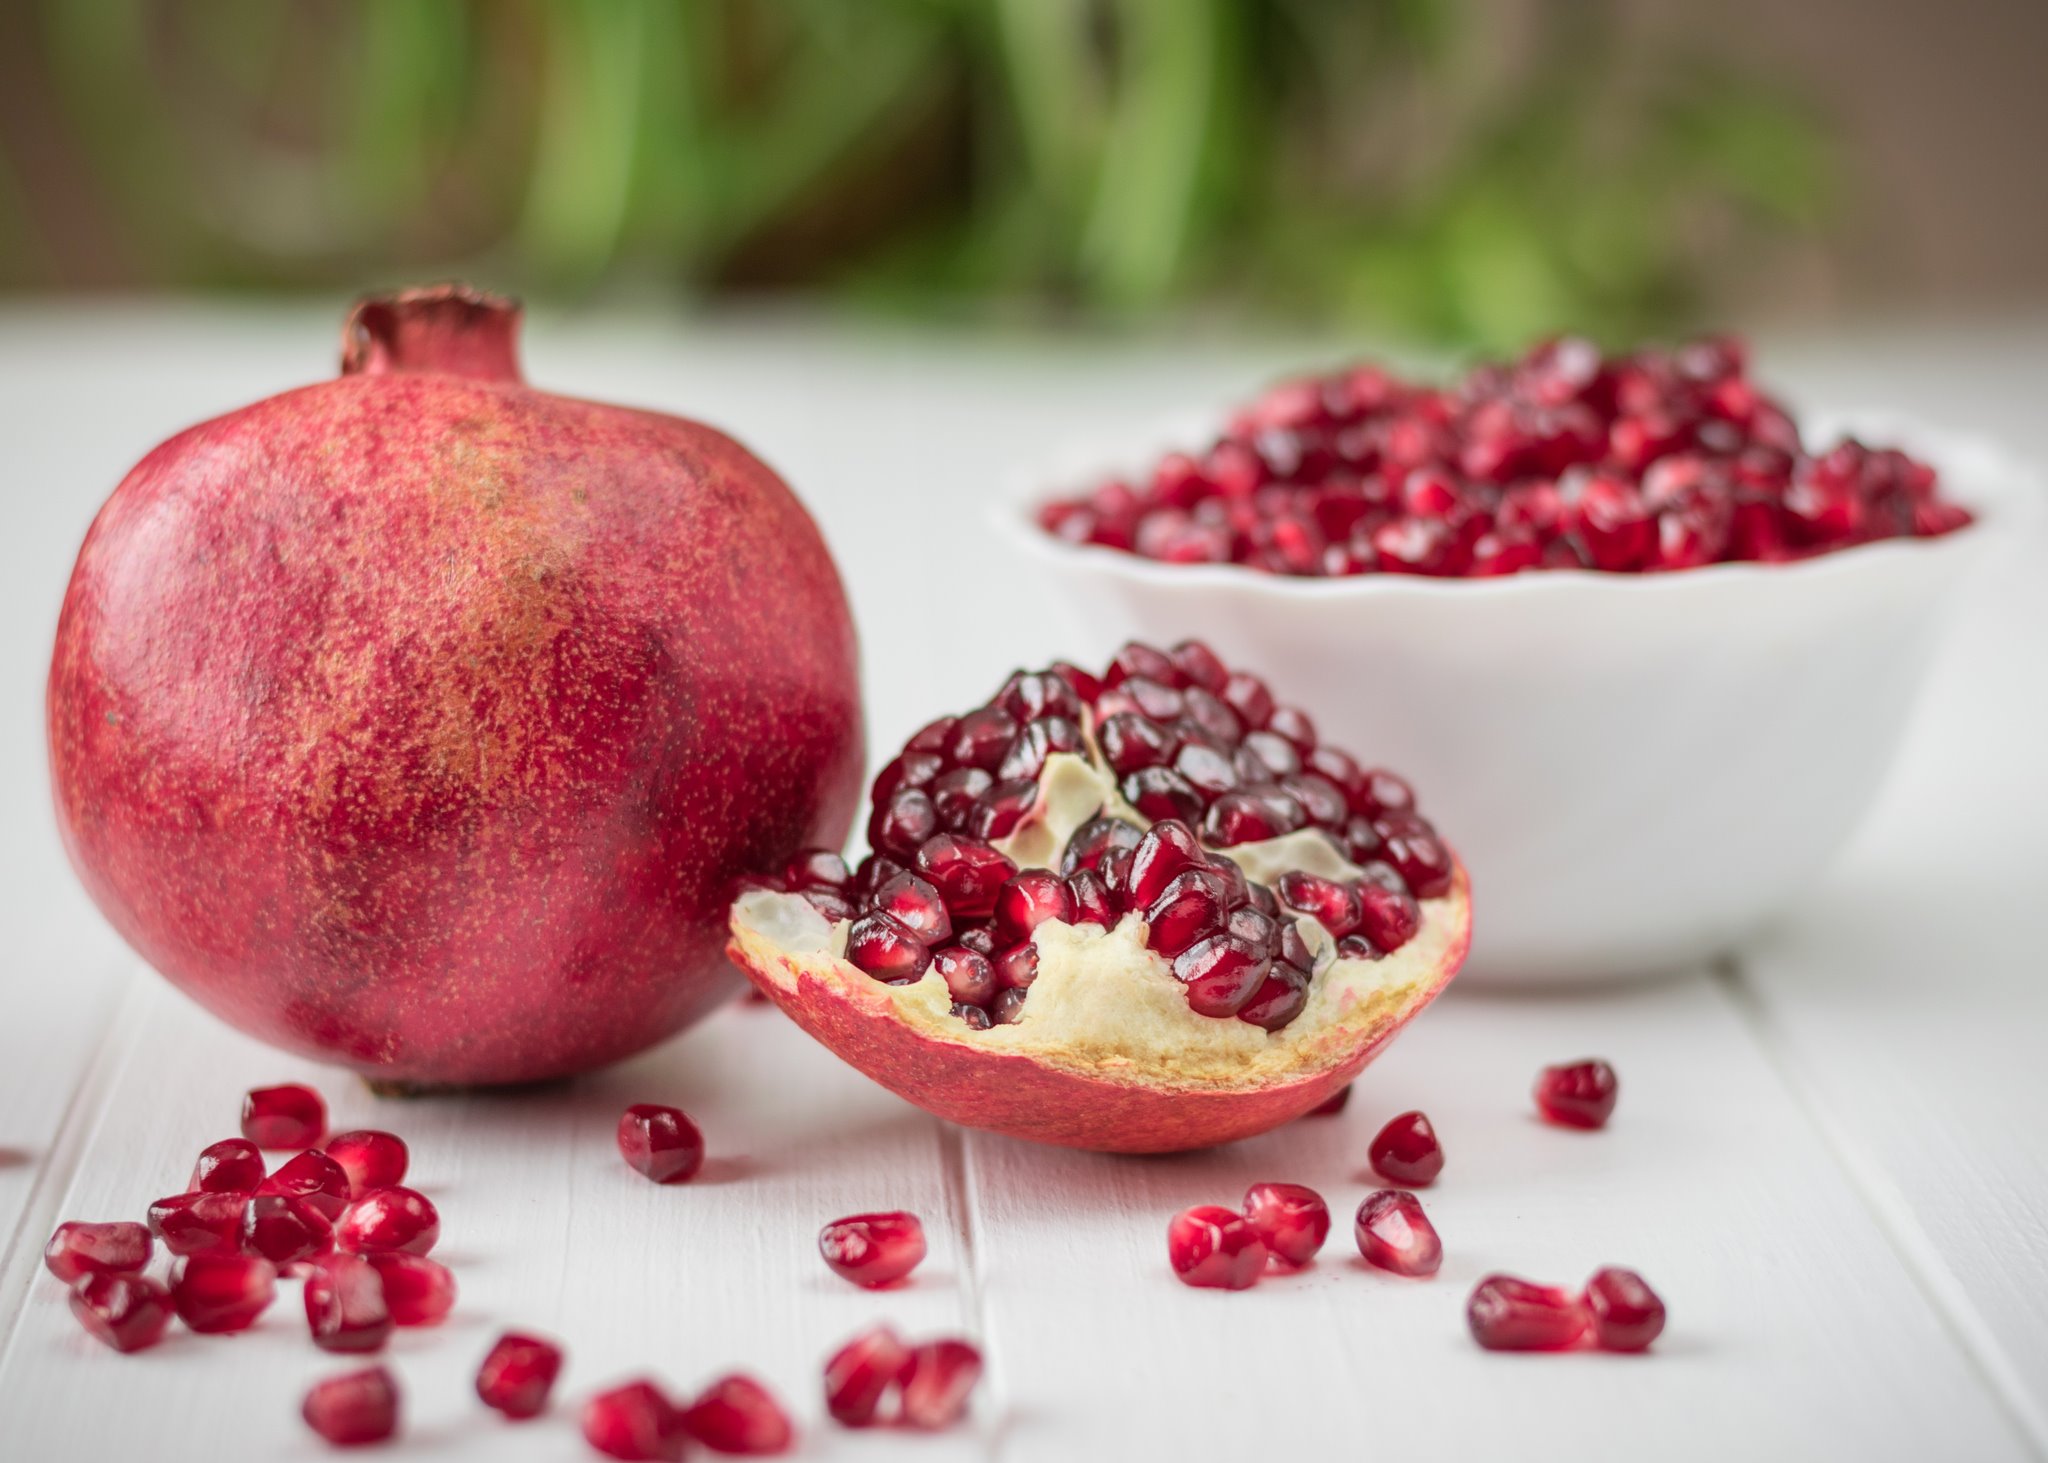 How To Save Pomegranate Seeds For Planting